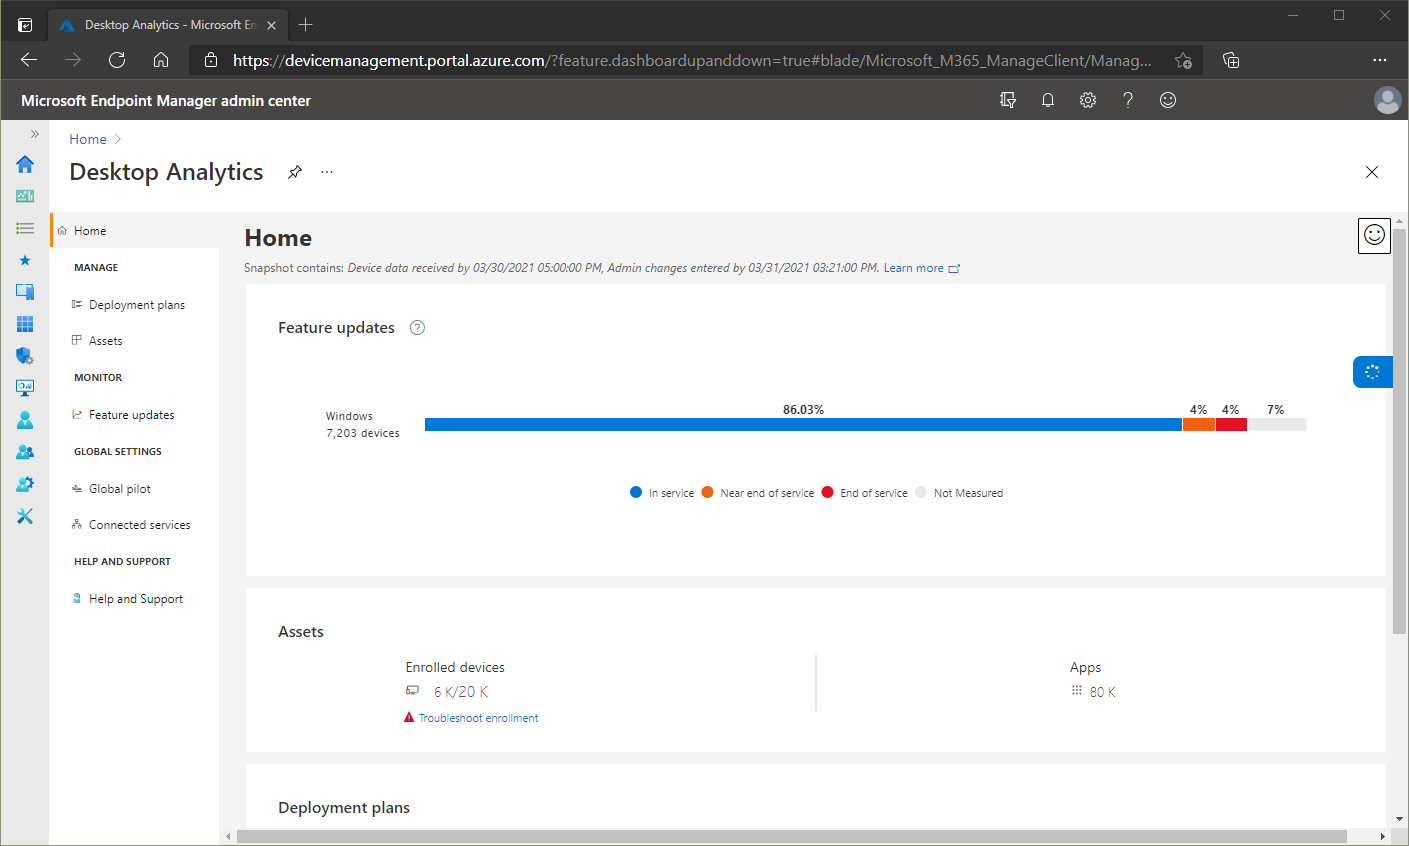 Screenshot of the Desktop Analytics home page in the Microsoft Intune admin center.